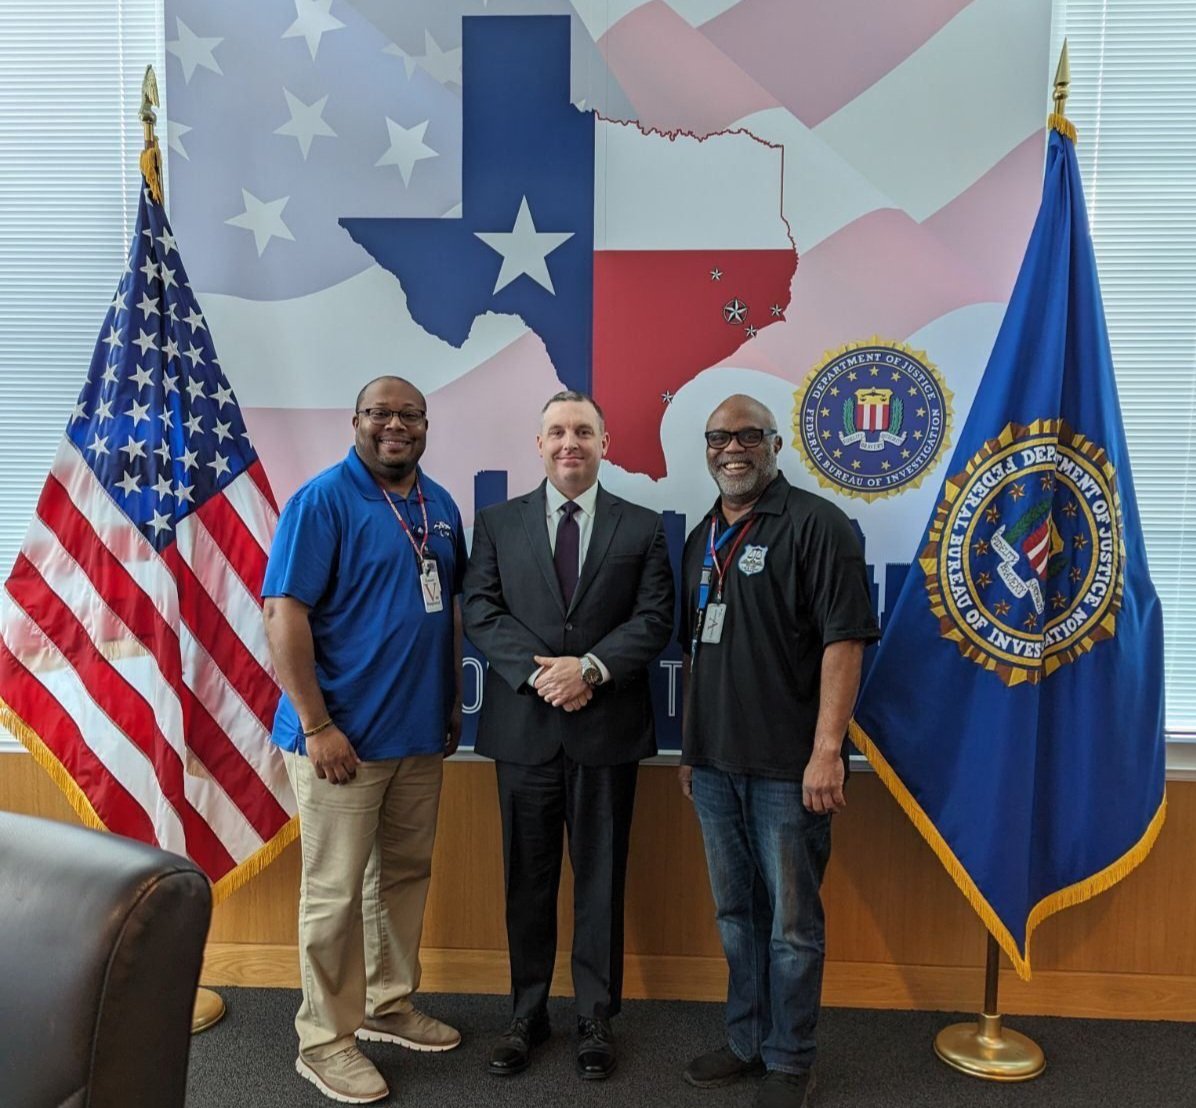 C.E. King Criminal Justice Teachers Mr. McCullum and Dr. Cross continues to strengthen the partnership with FBI-Houston Division and Special Agent In Charge Douglas A. Williams, Jr. #lawenforcement #legal services #kingcriminaljustice